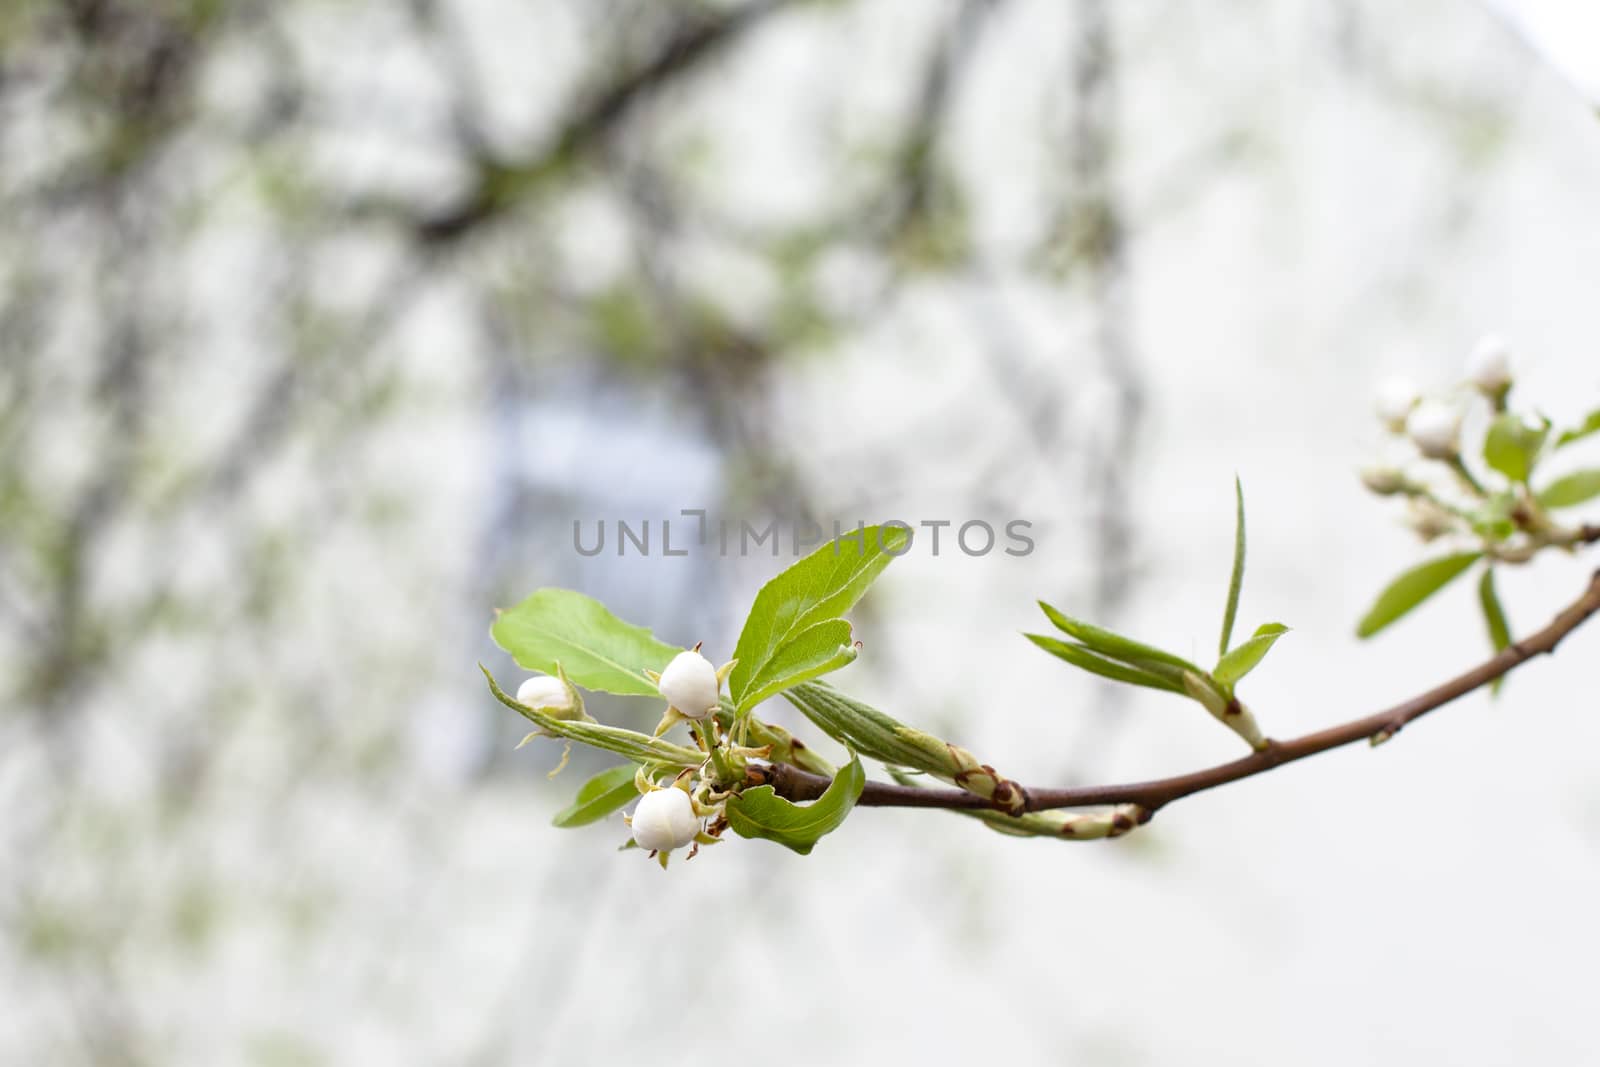 Small white apple flower burgeons on a branch
